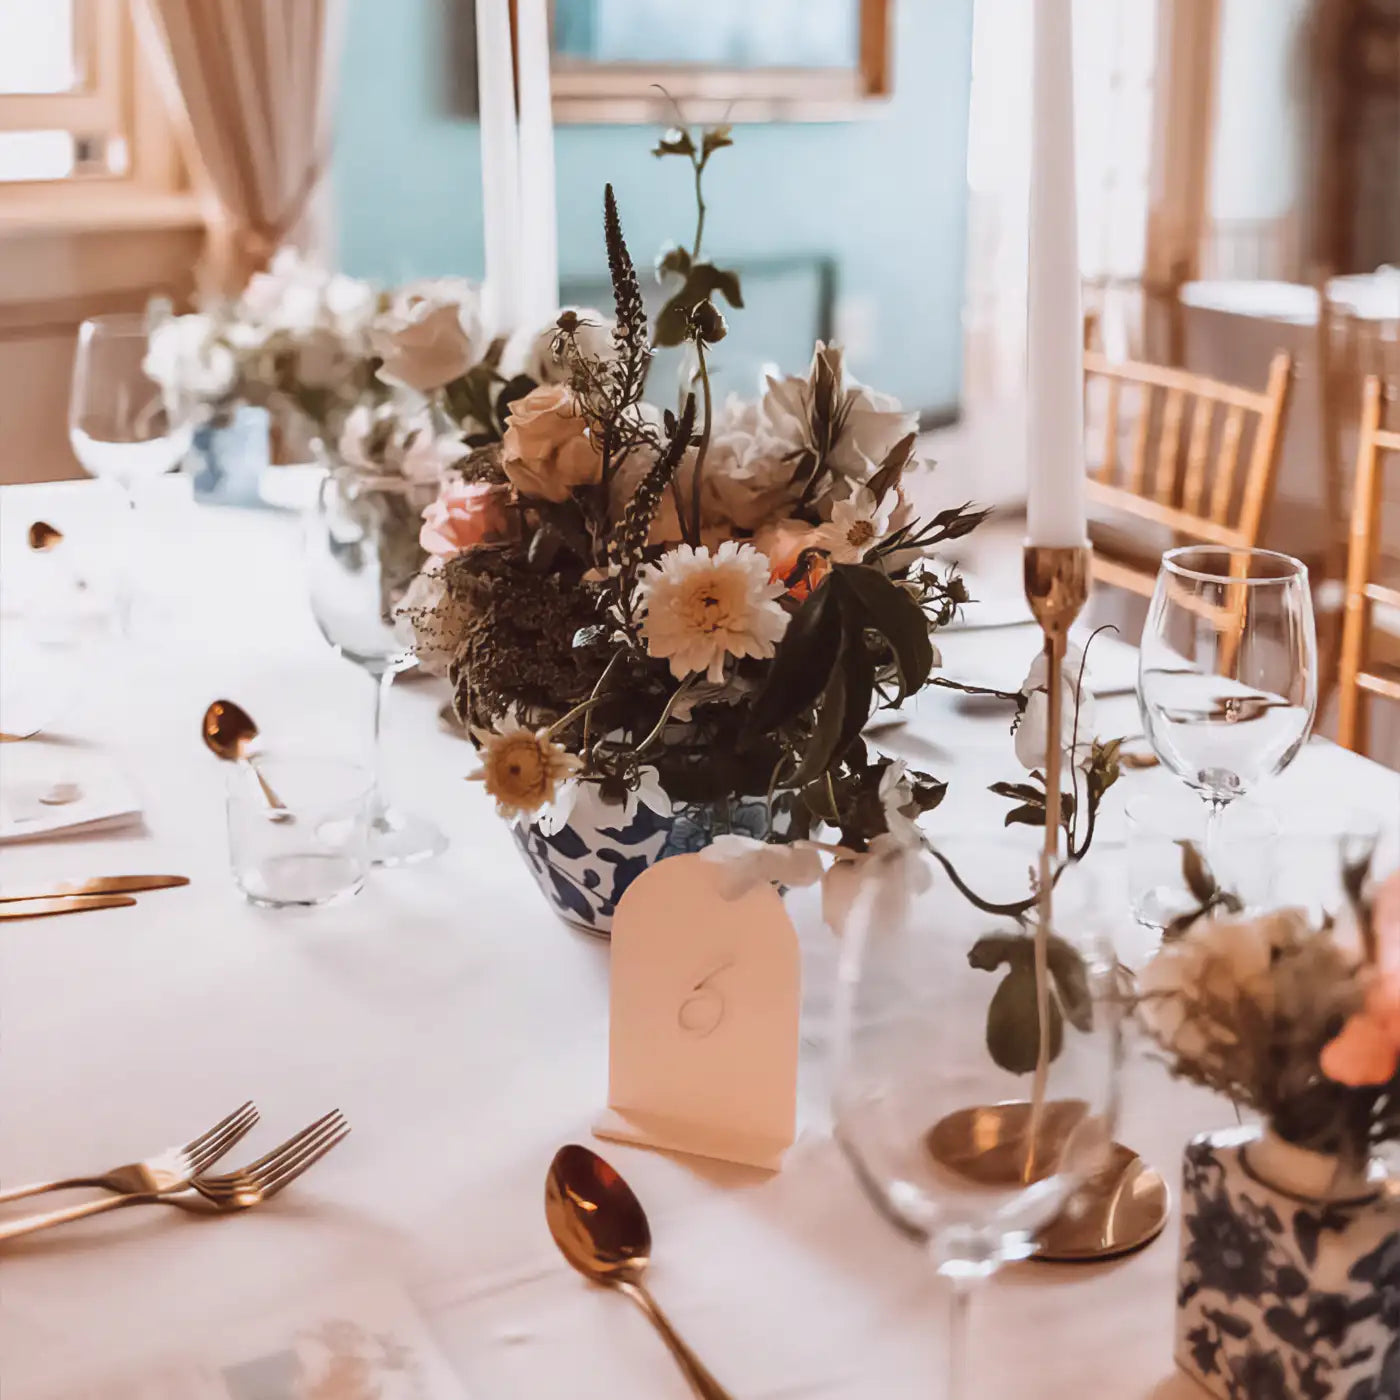 Close-up of a beautifully set table at an elegant event with white linens, gold cutlery, glassware, and blue and white floral centrepieces in vases, complemented by tall candlesticks. Fabulous Flowers and Gifts.